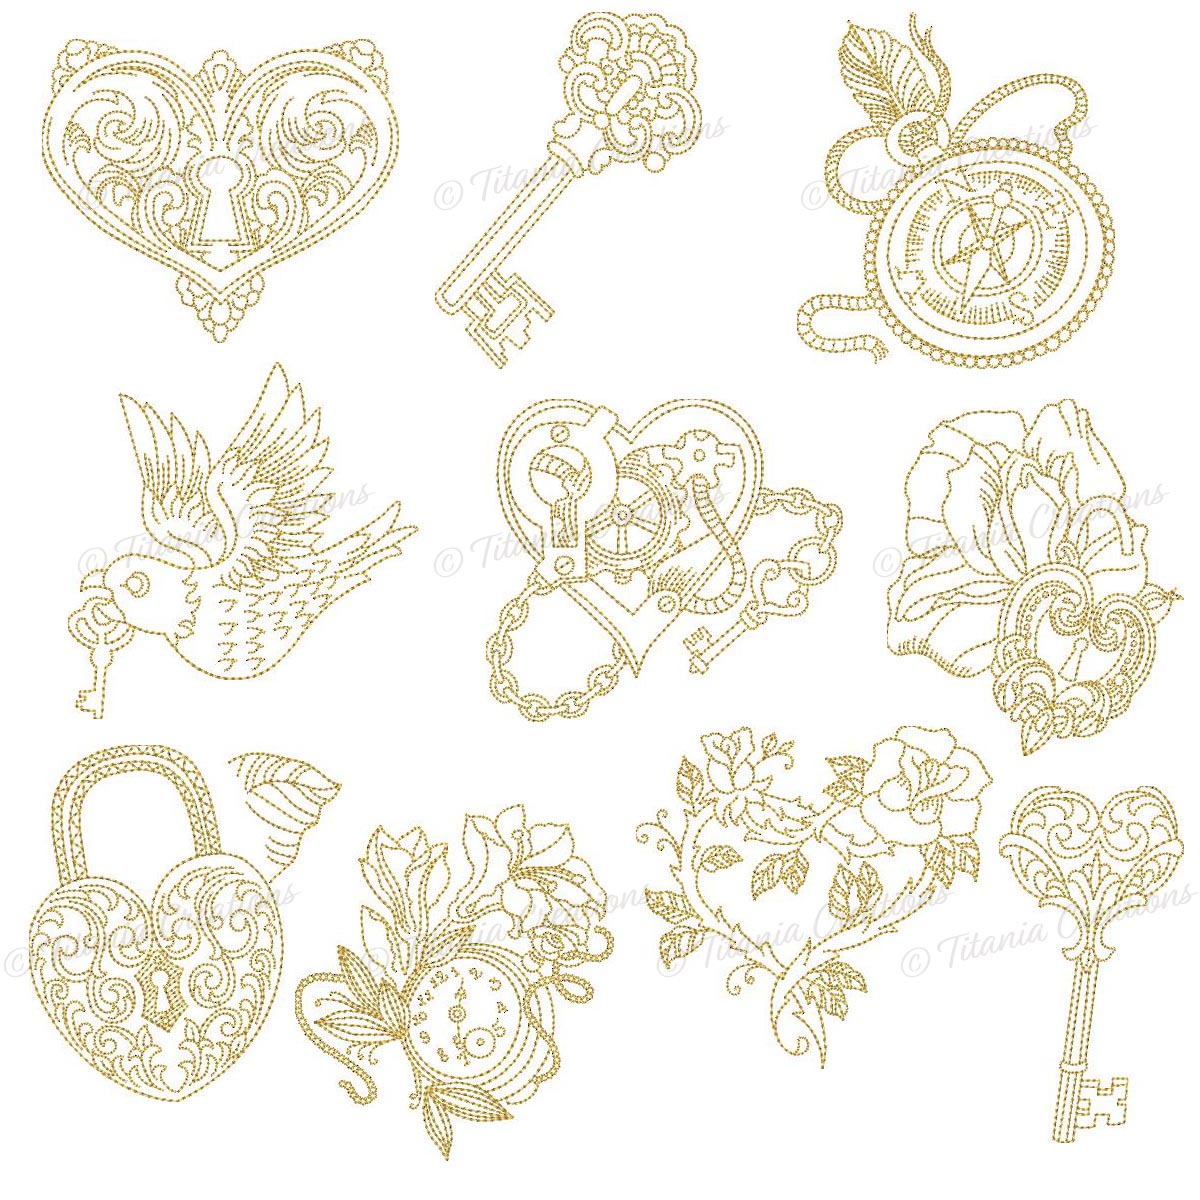 Embellishments in Gold. Set of 10 Designs. Includes 4x4 & 5x7